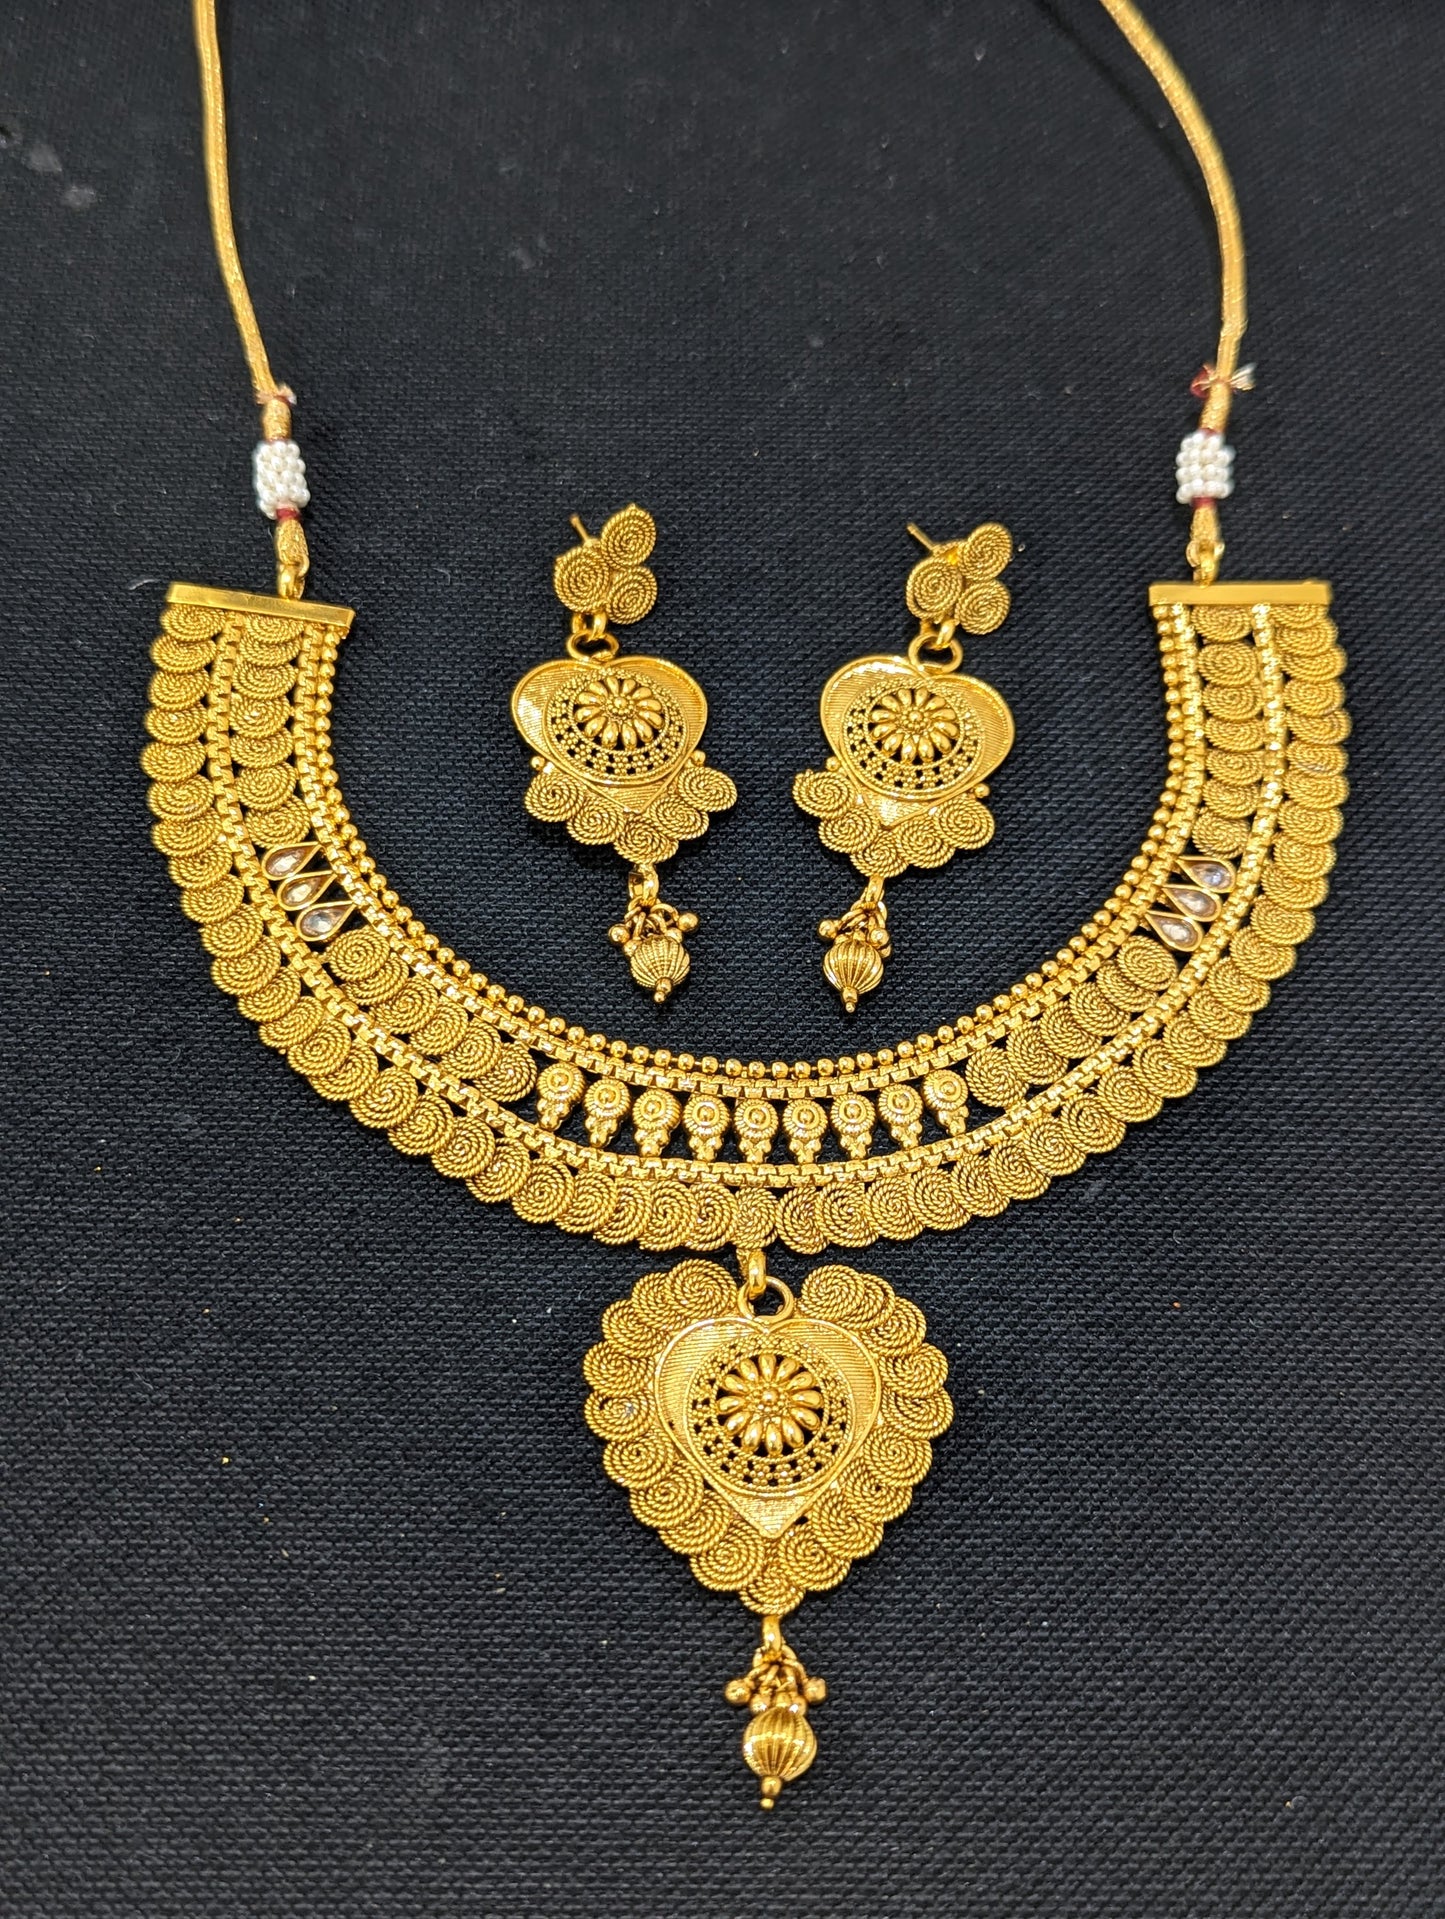 Real gold replica design Choker Necklace and Earrings set - Design 2